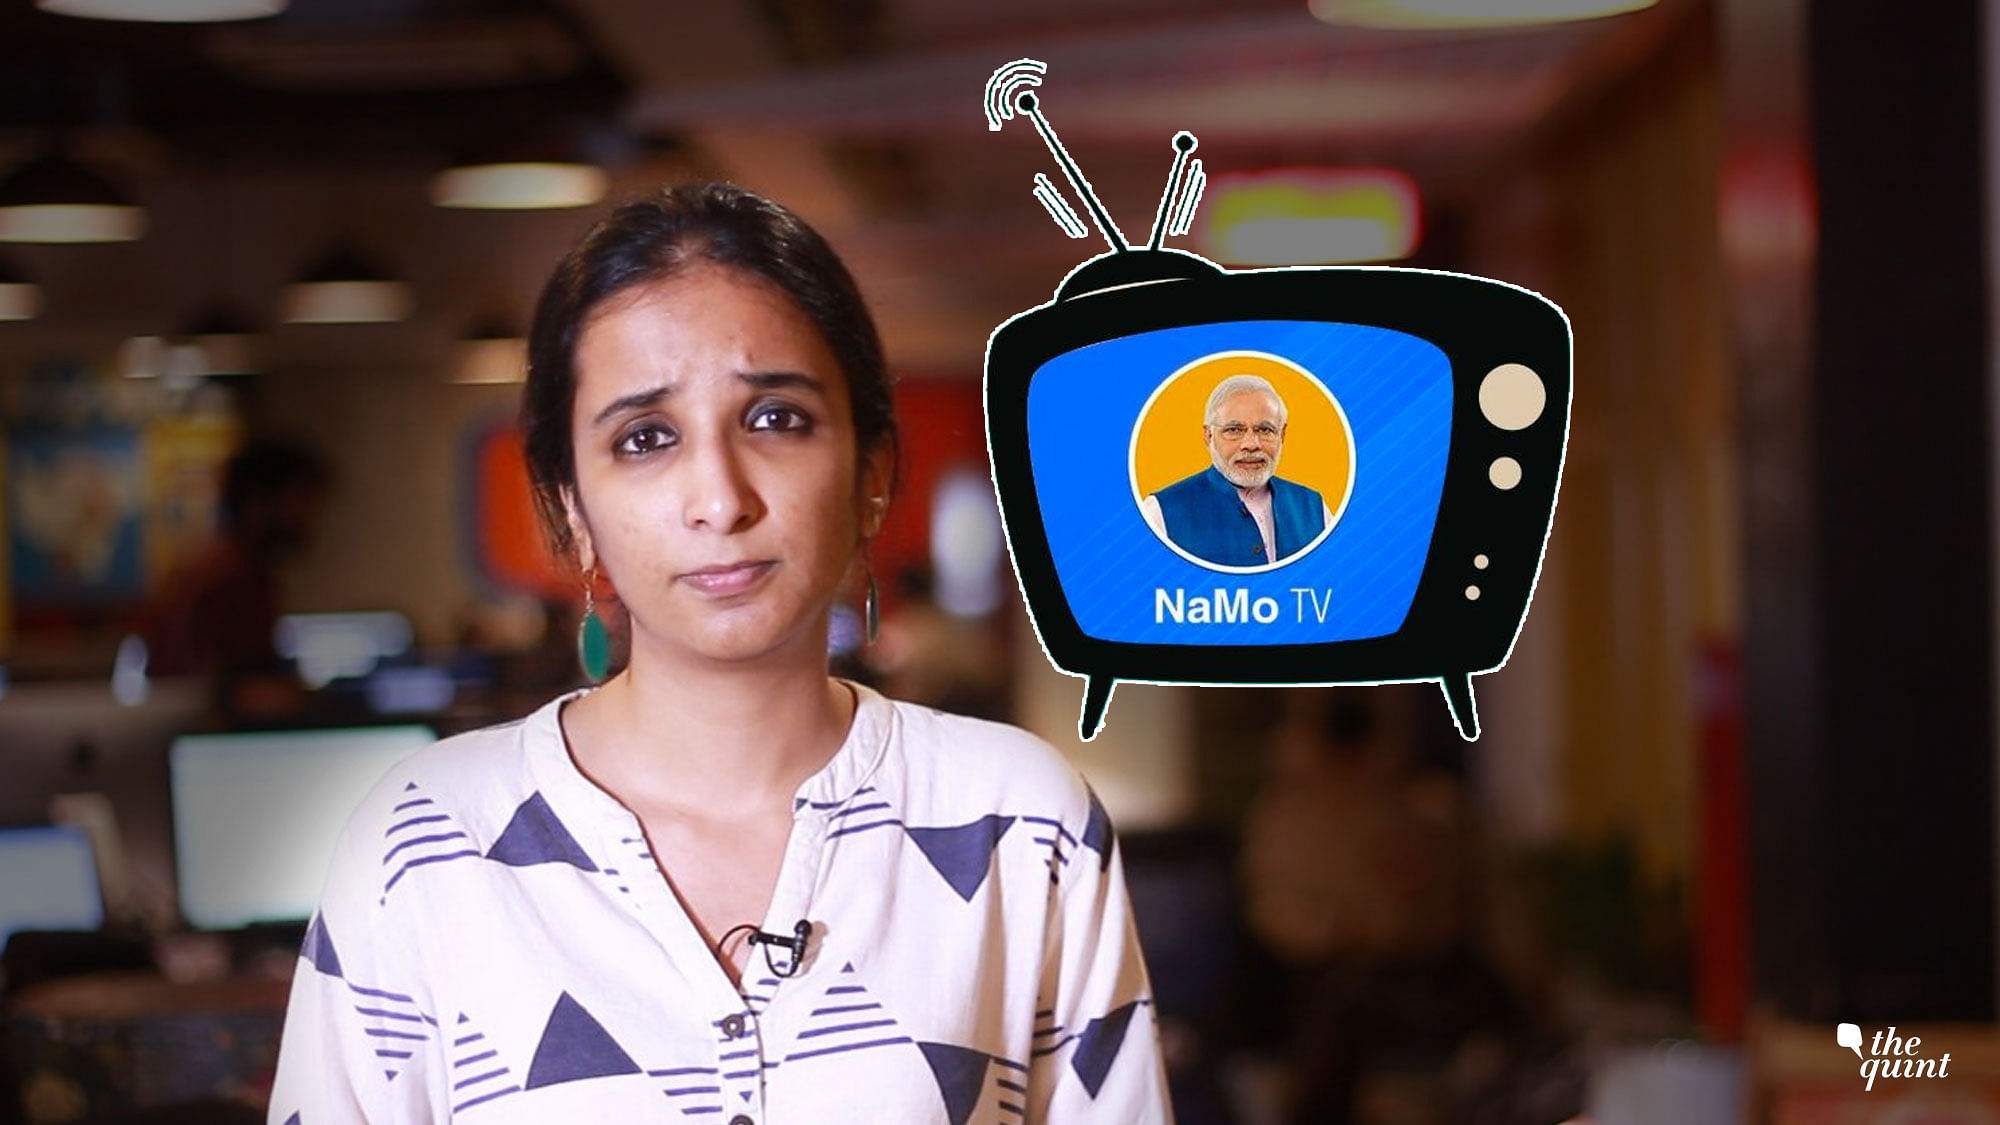 Since its launch, NaMo TV has sparked questions on its legality and ownership. Here’s all you need to know.&nbsp;